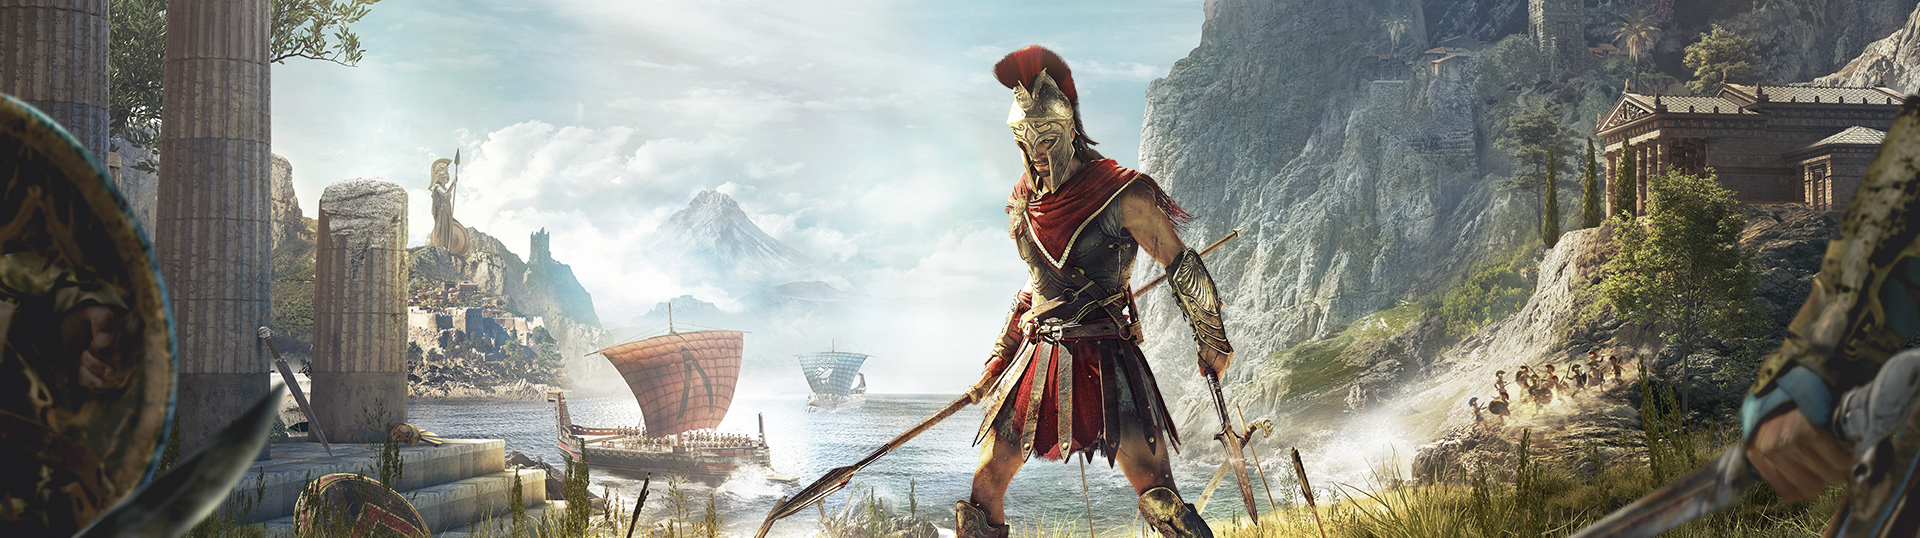  Assassin's Creed Odyssey - PlayStation 4 Standard Edition :  Ubisoft: Video Games